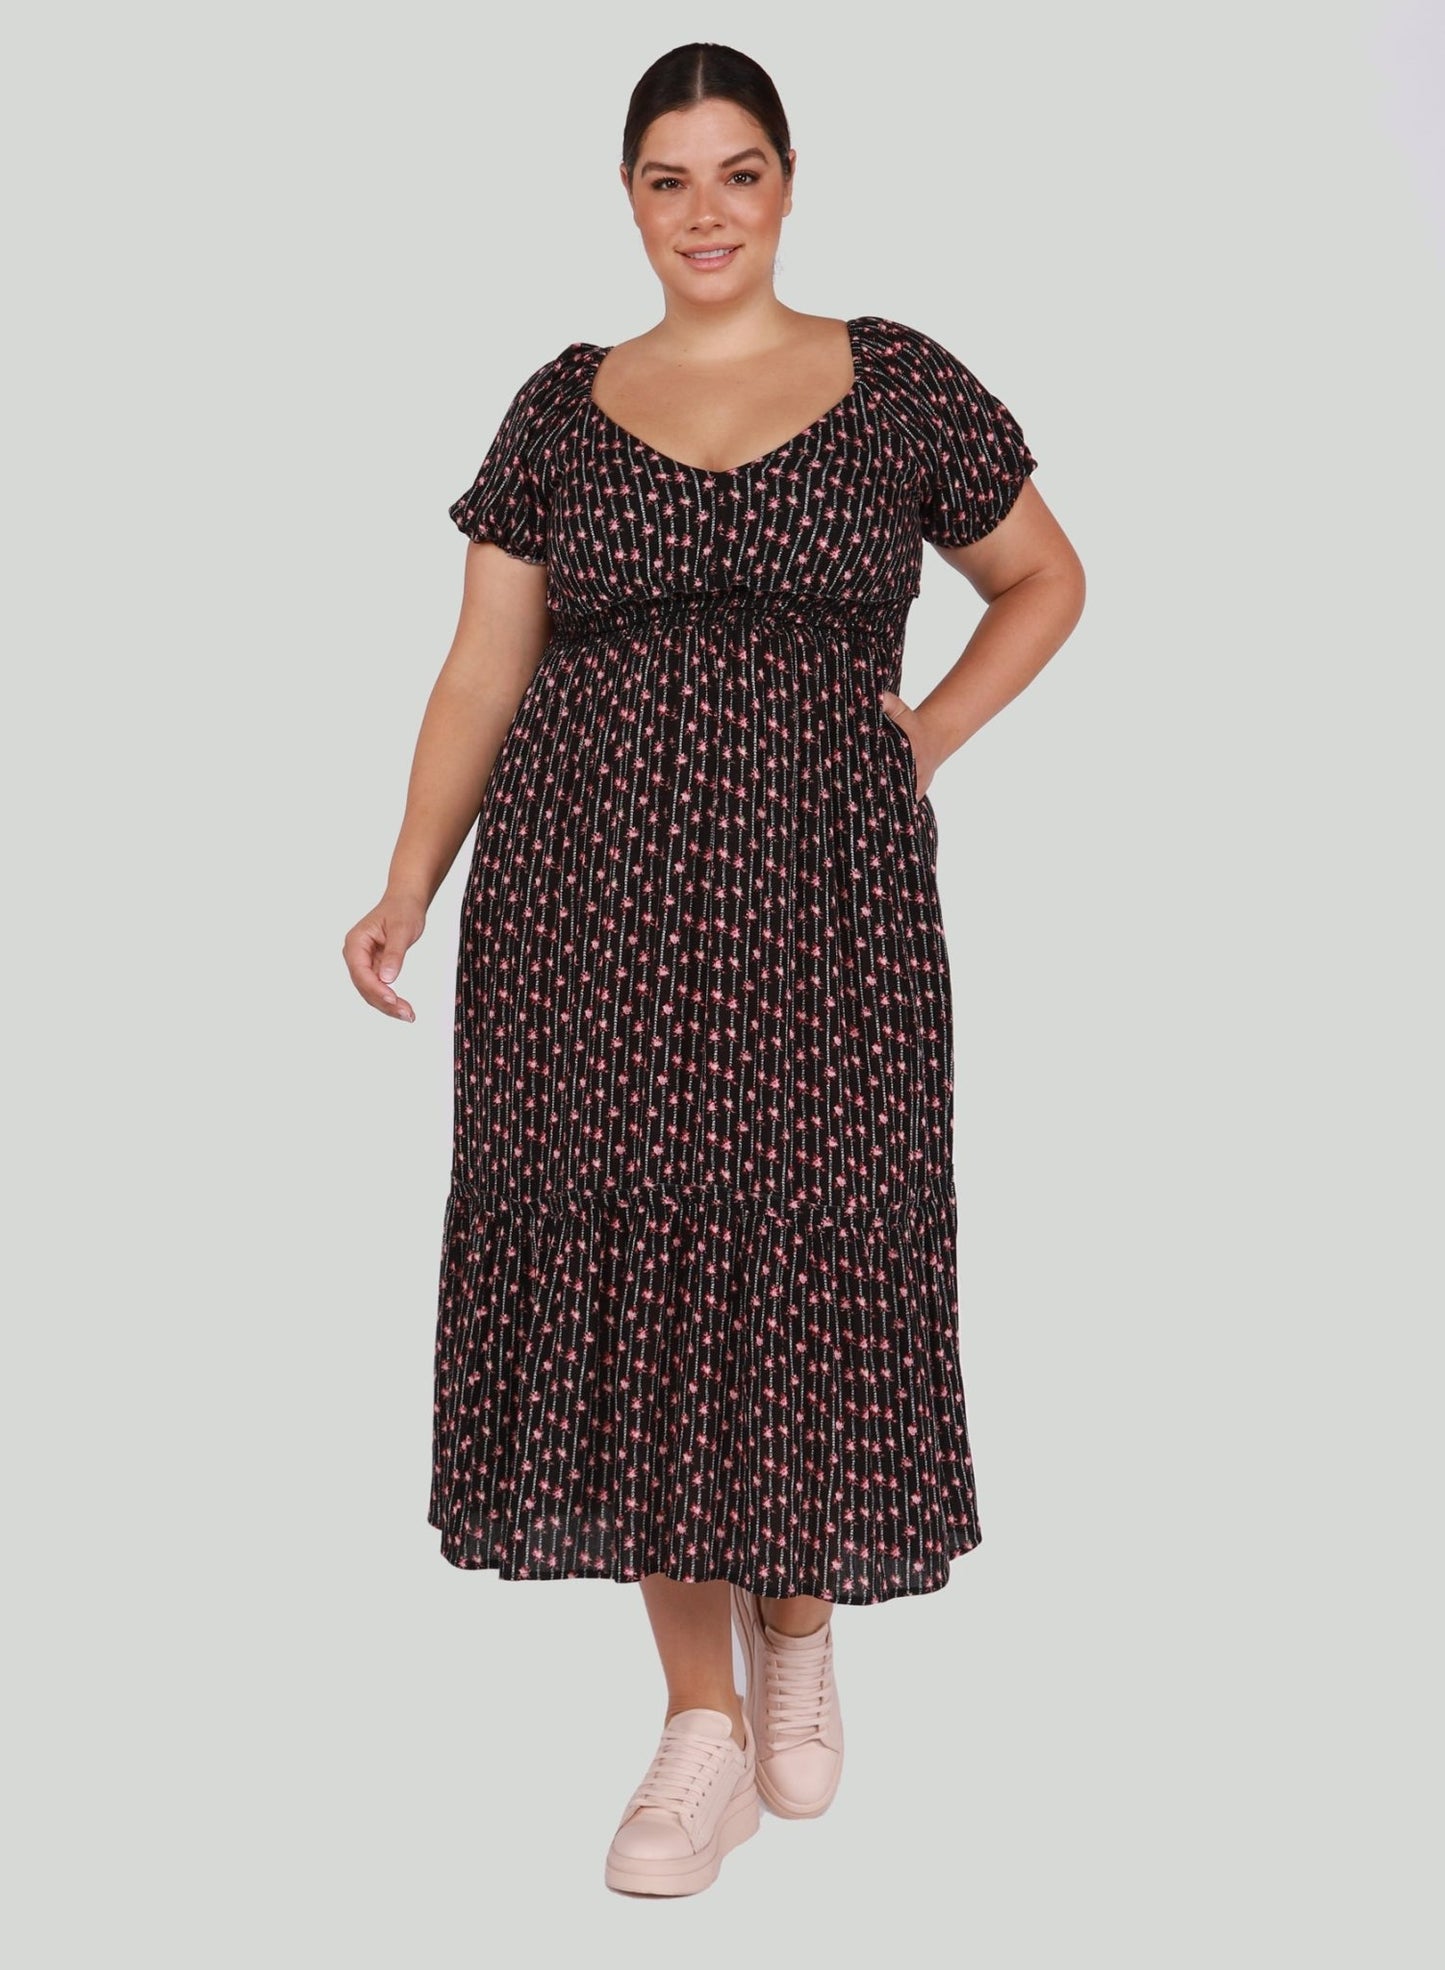 Plus Size Floral Dress (Preorder Ships Approx March 3rd) - Pinned Up Bra Lounge